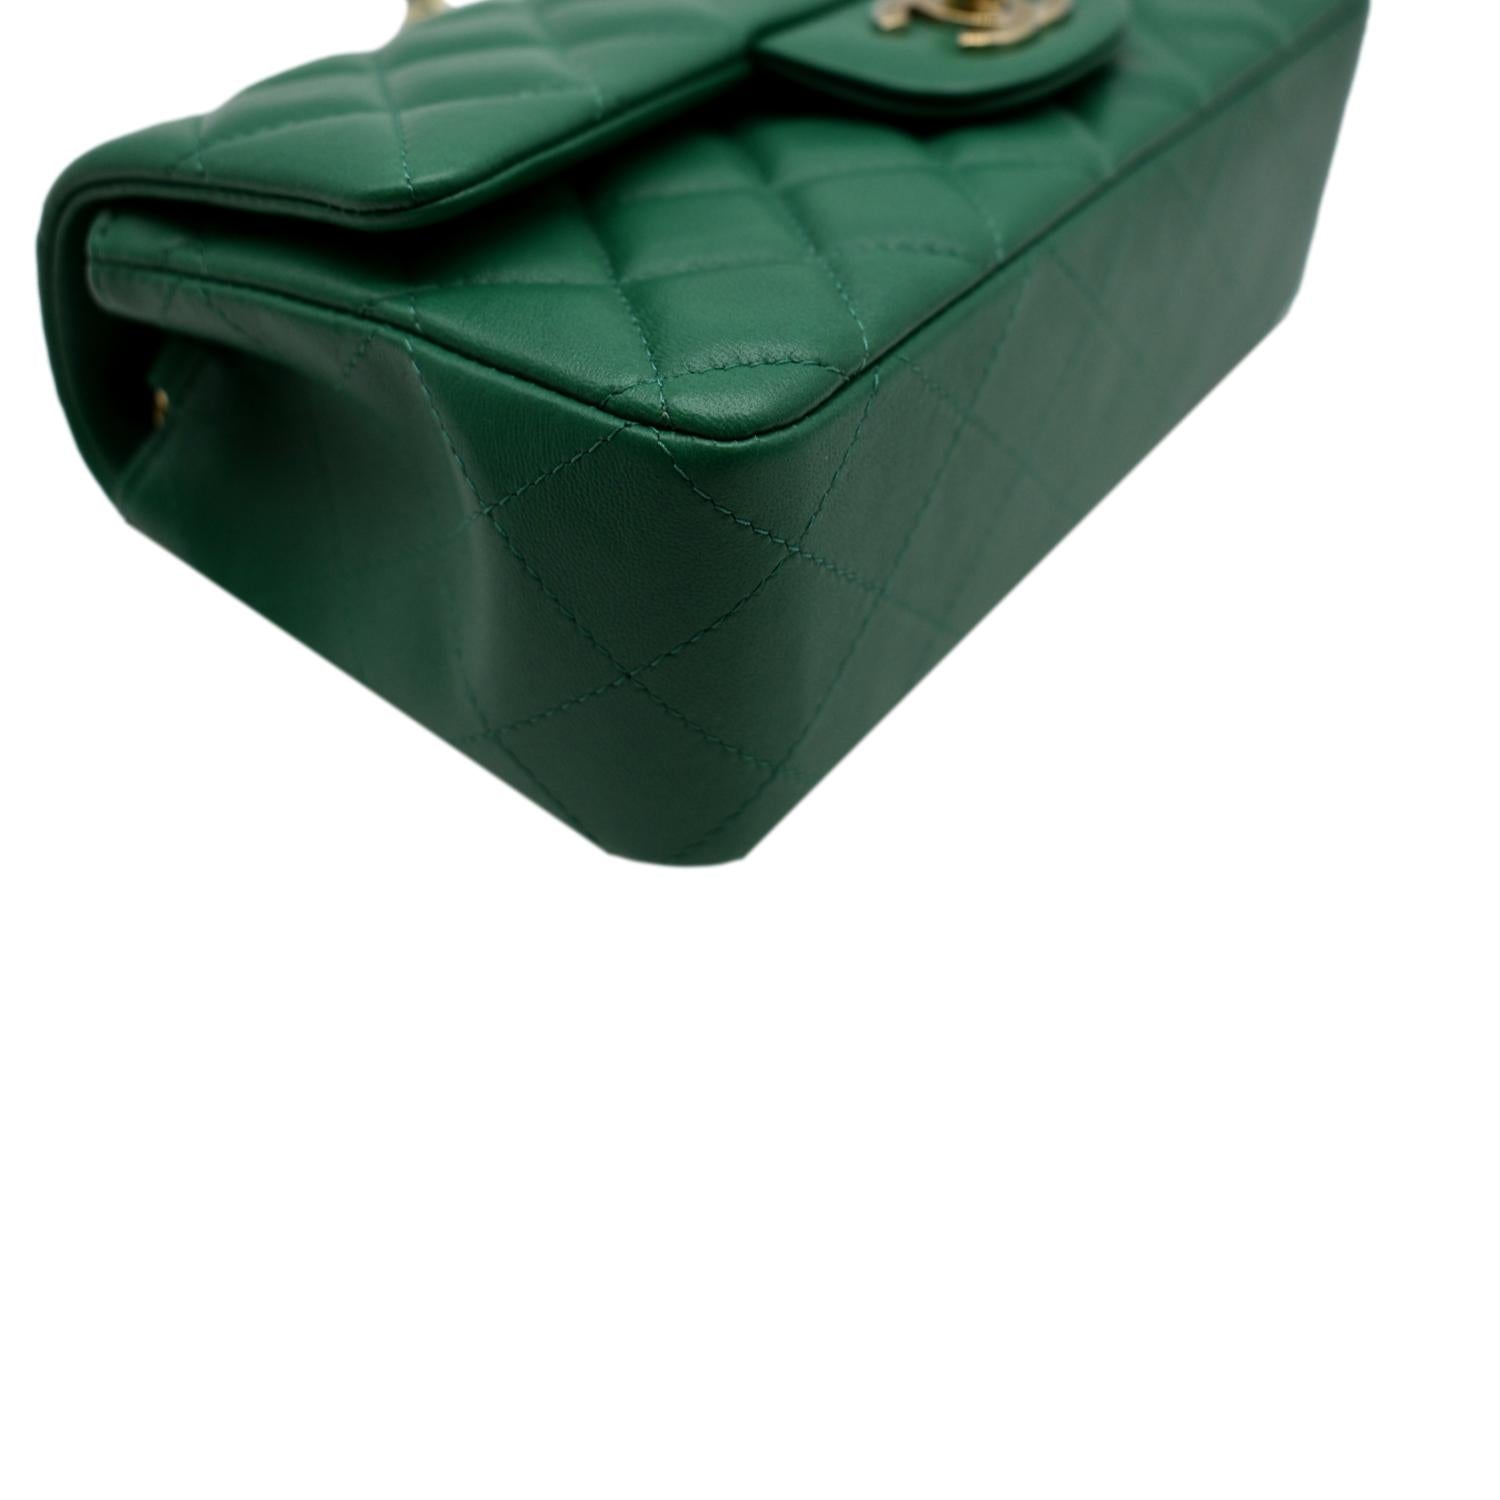 Green Leather Quilted Flap Bag